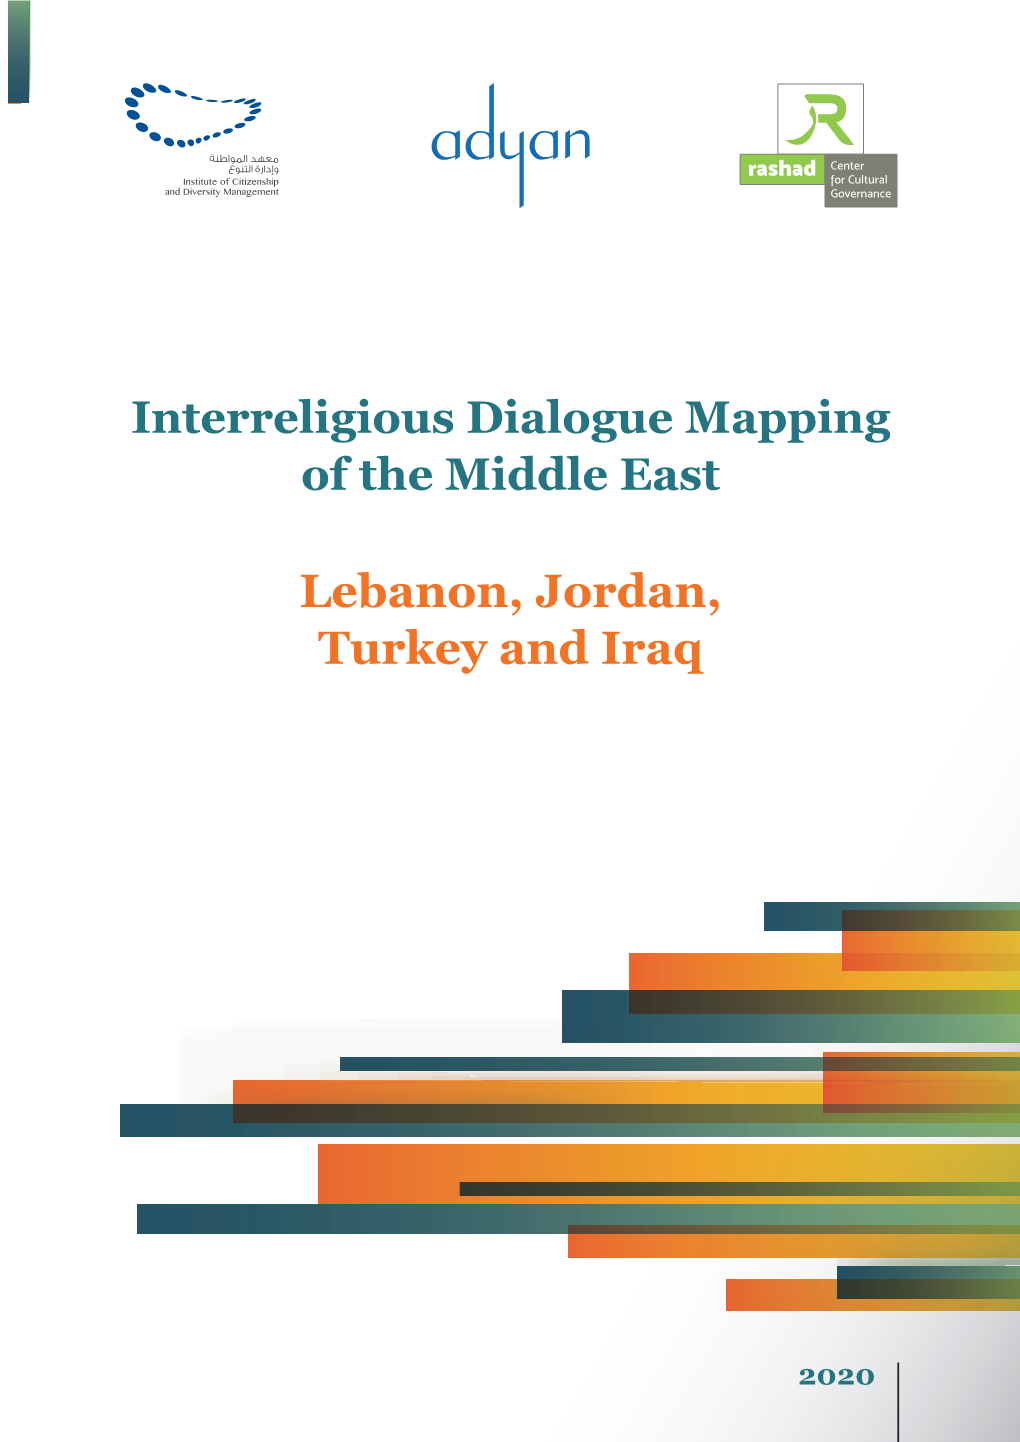 Interreligious Dialogue Mapping of the Middle East